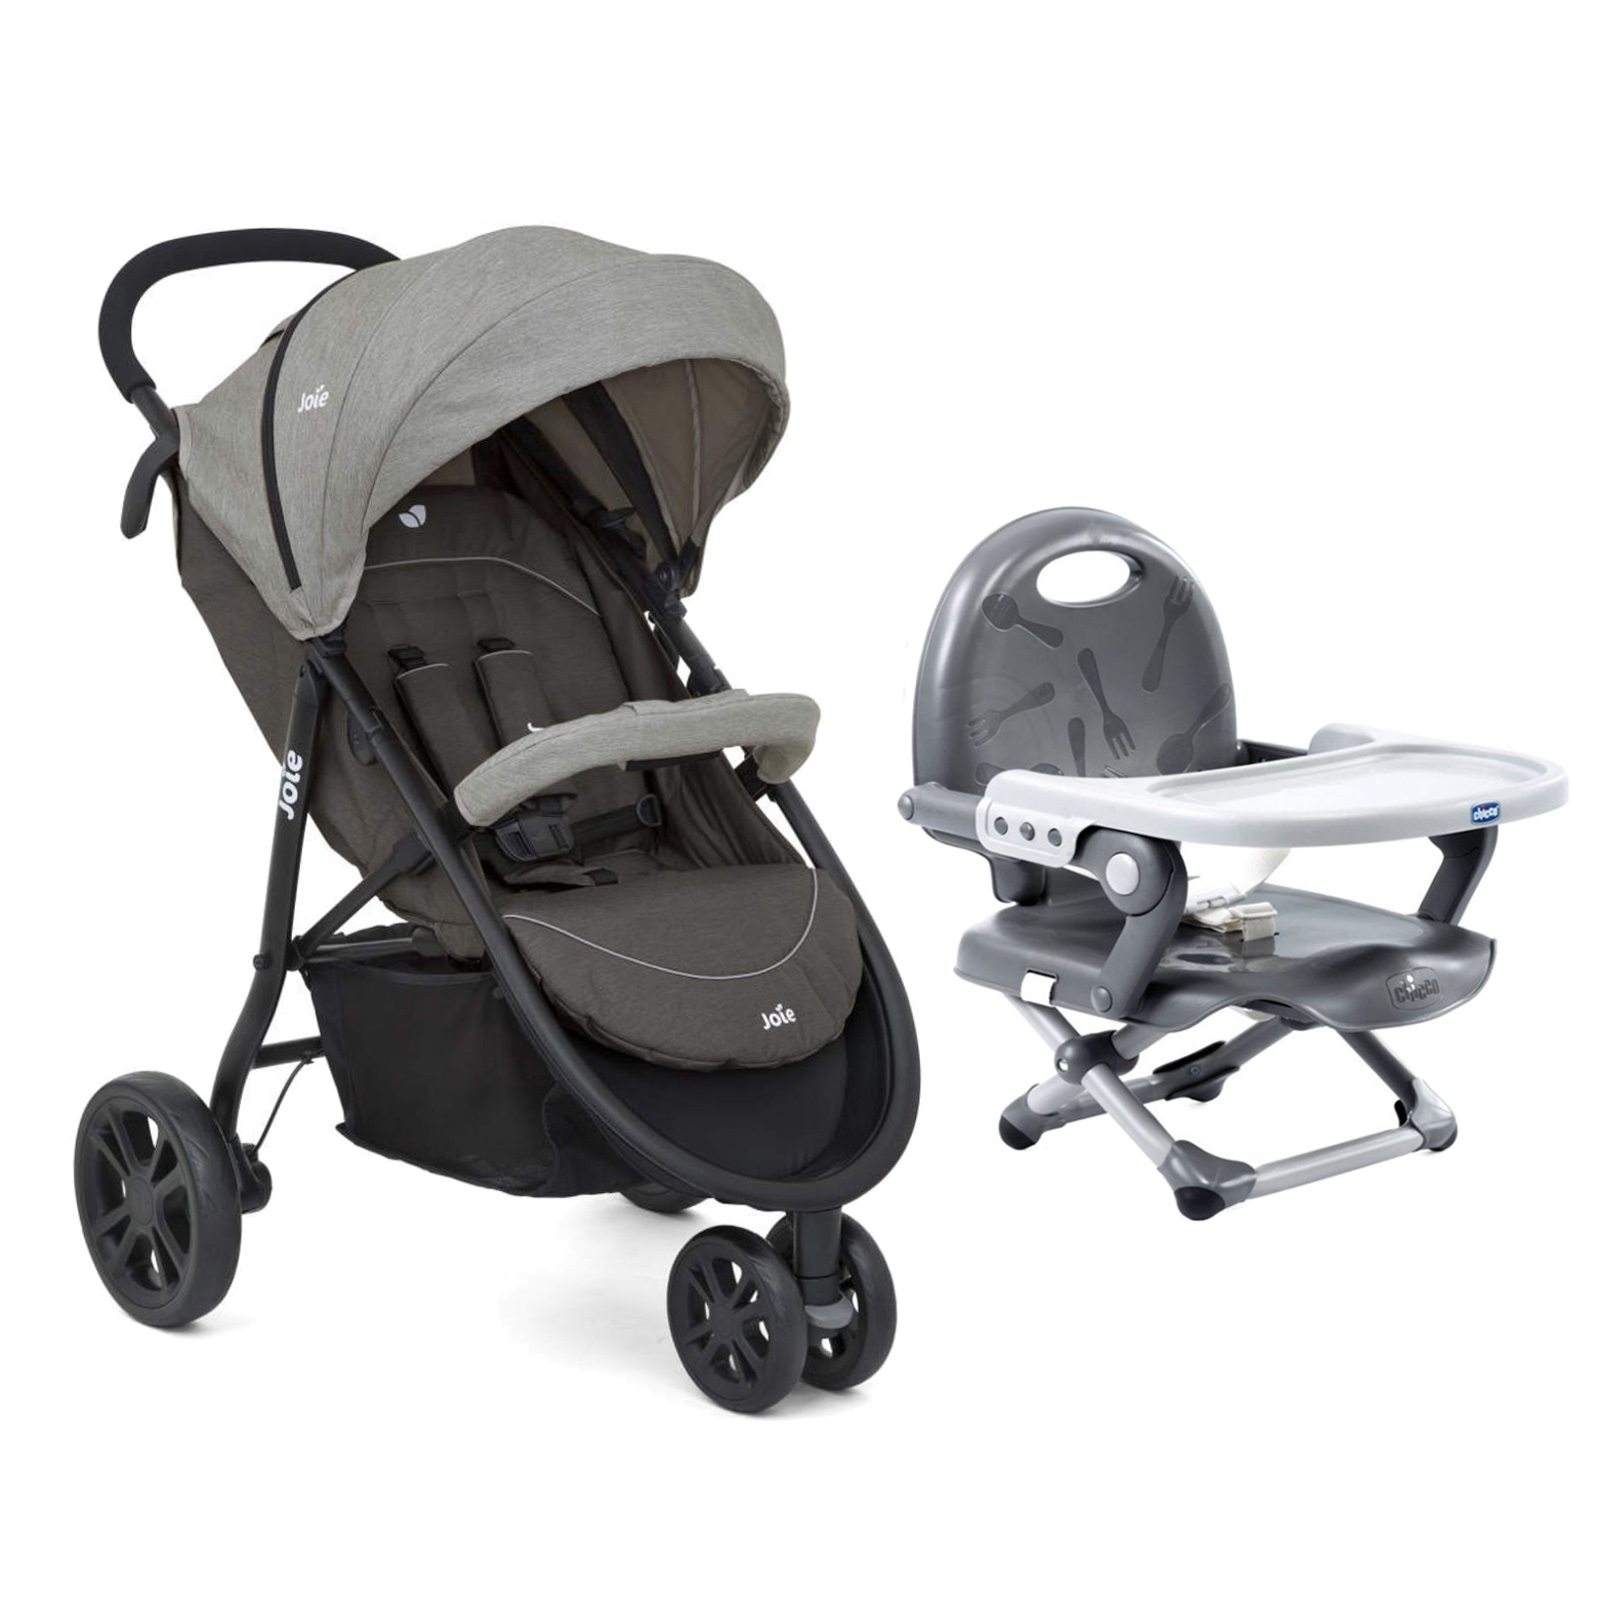 3 wheel stroller with car seat